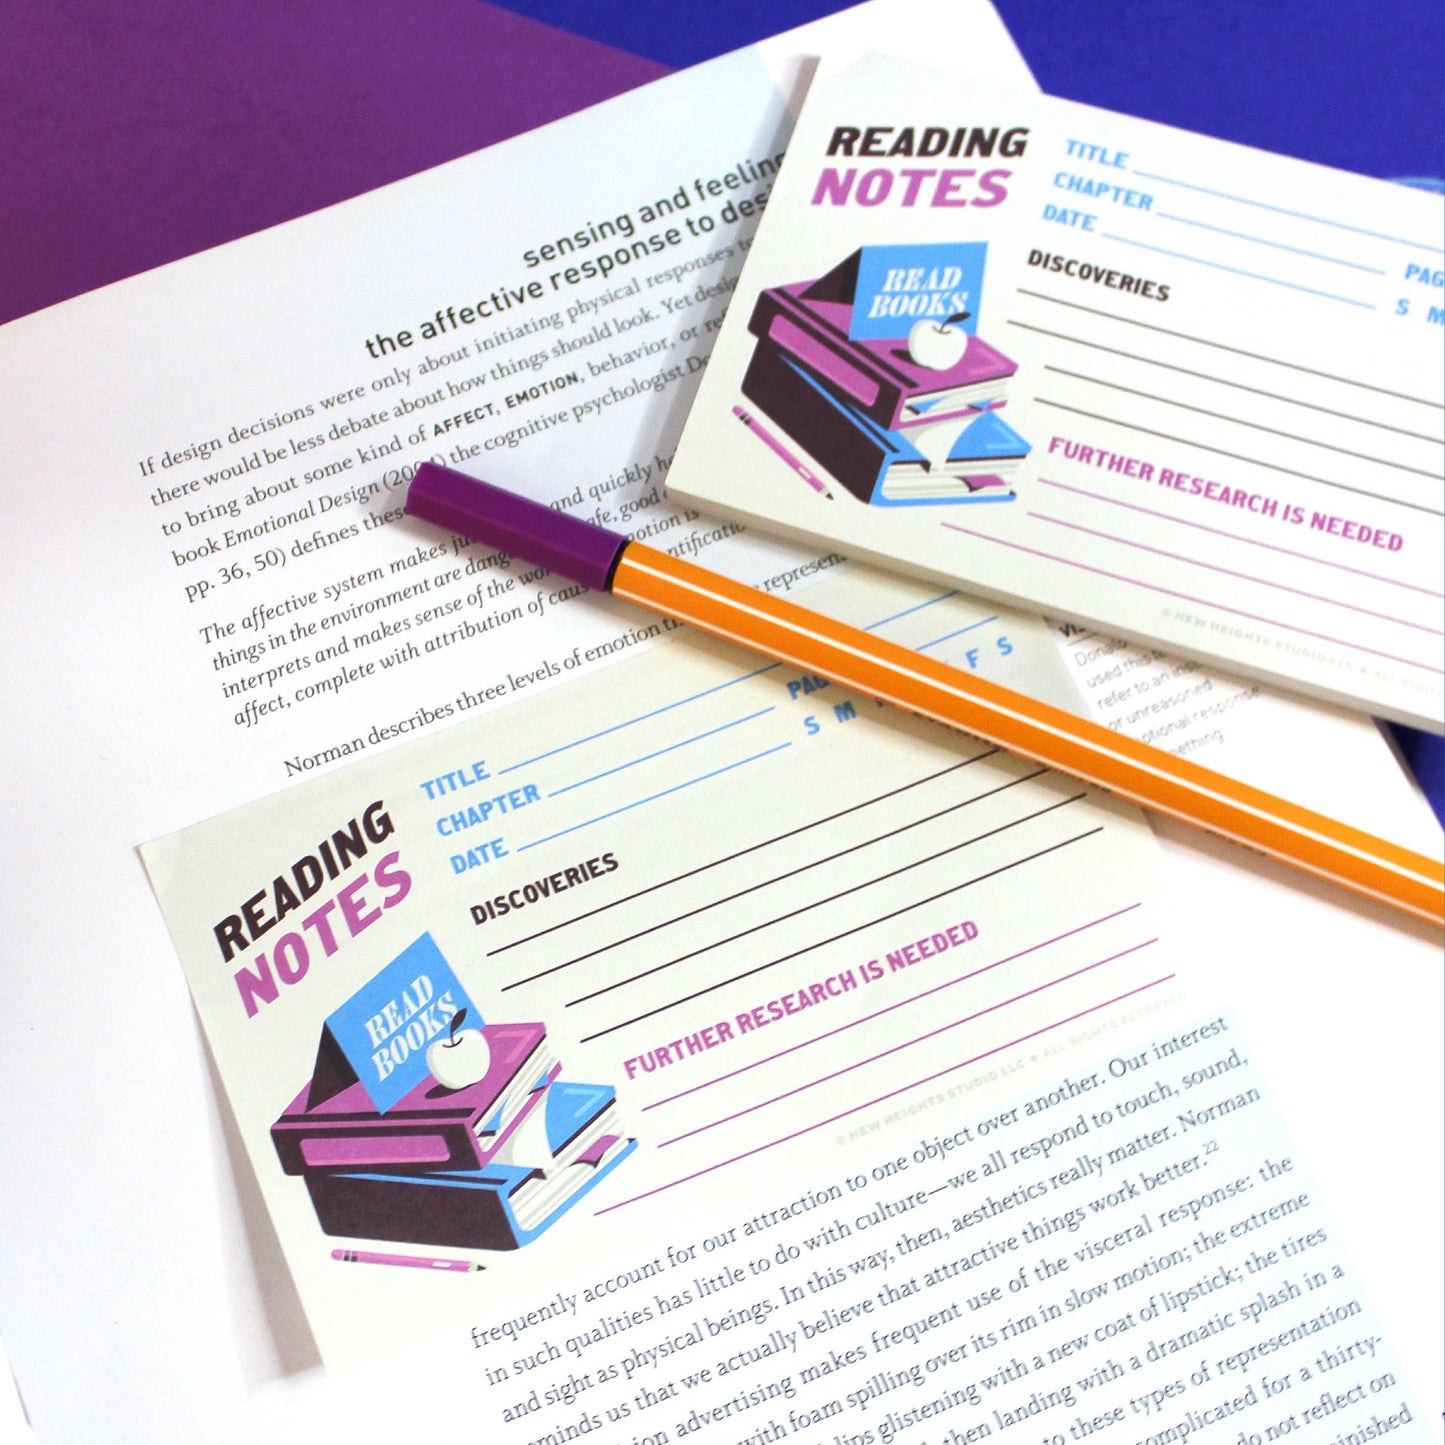 New Heights Studio - "Reading Notes" Sticky Notes For Annotations (5x3)